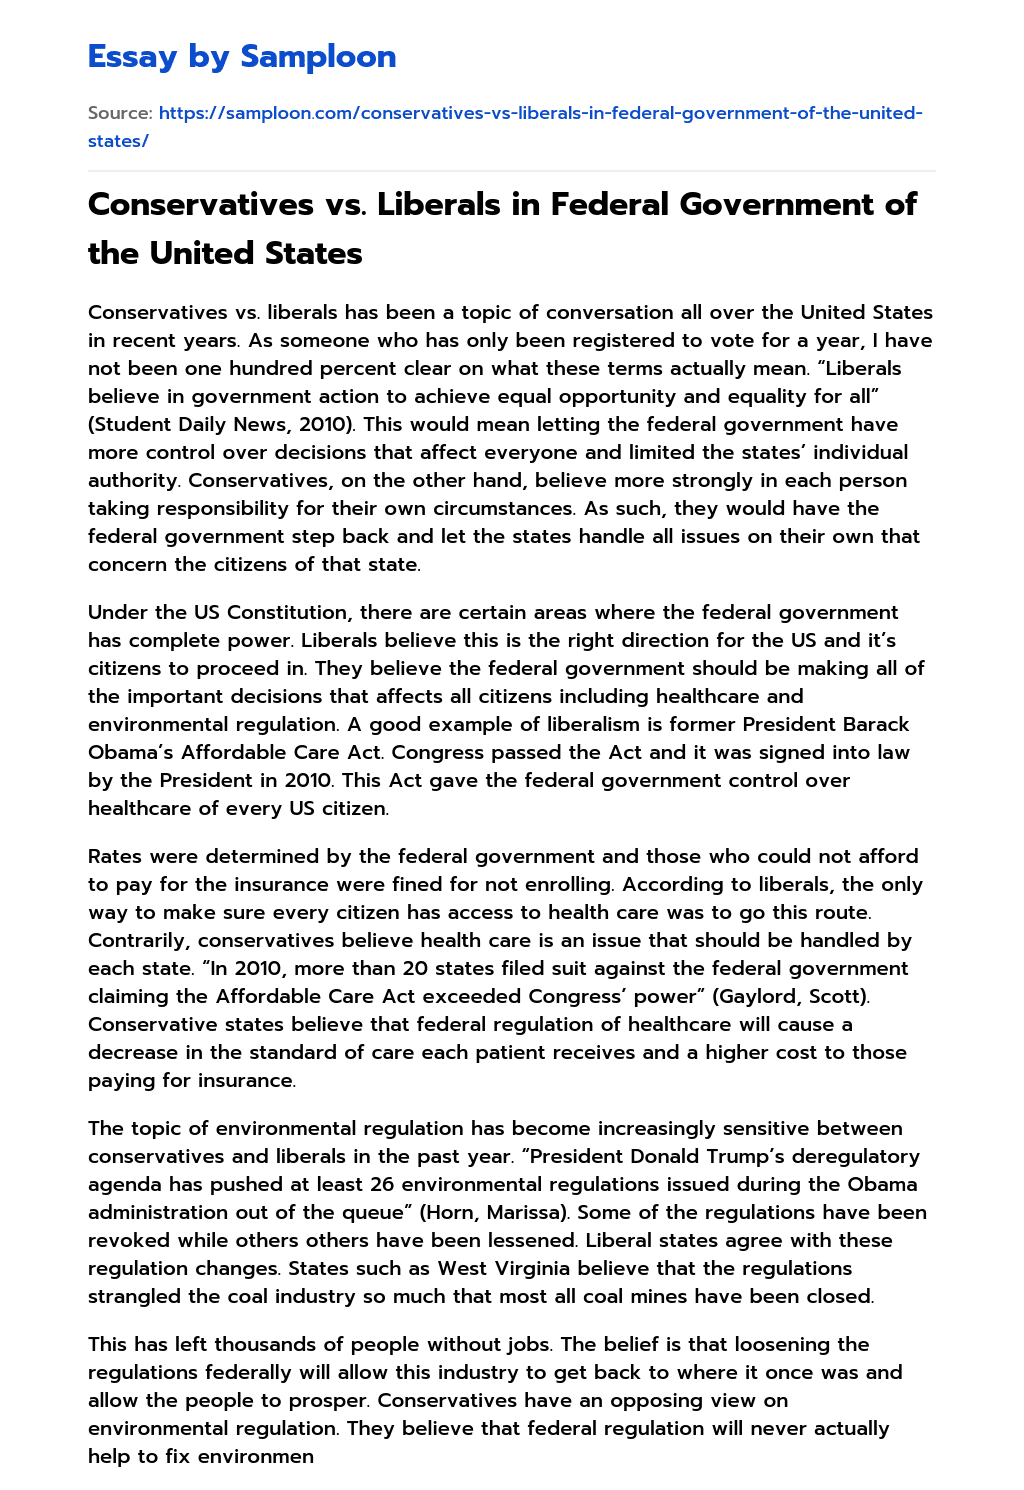 Conservatives vs. Liberals in Federal Government of the United States essay